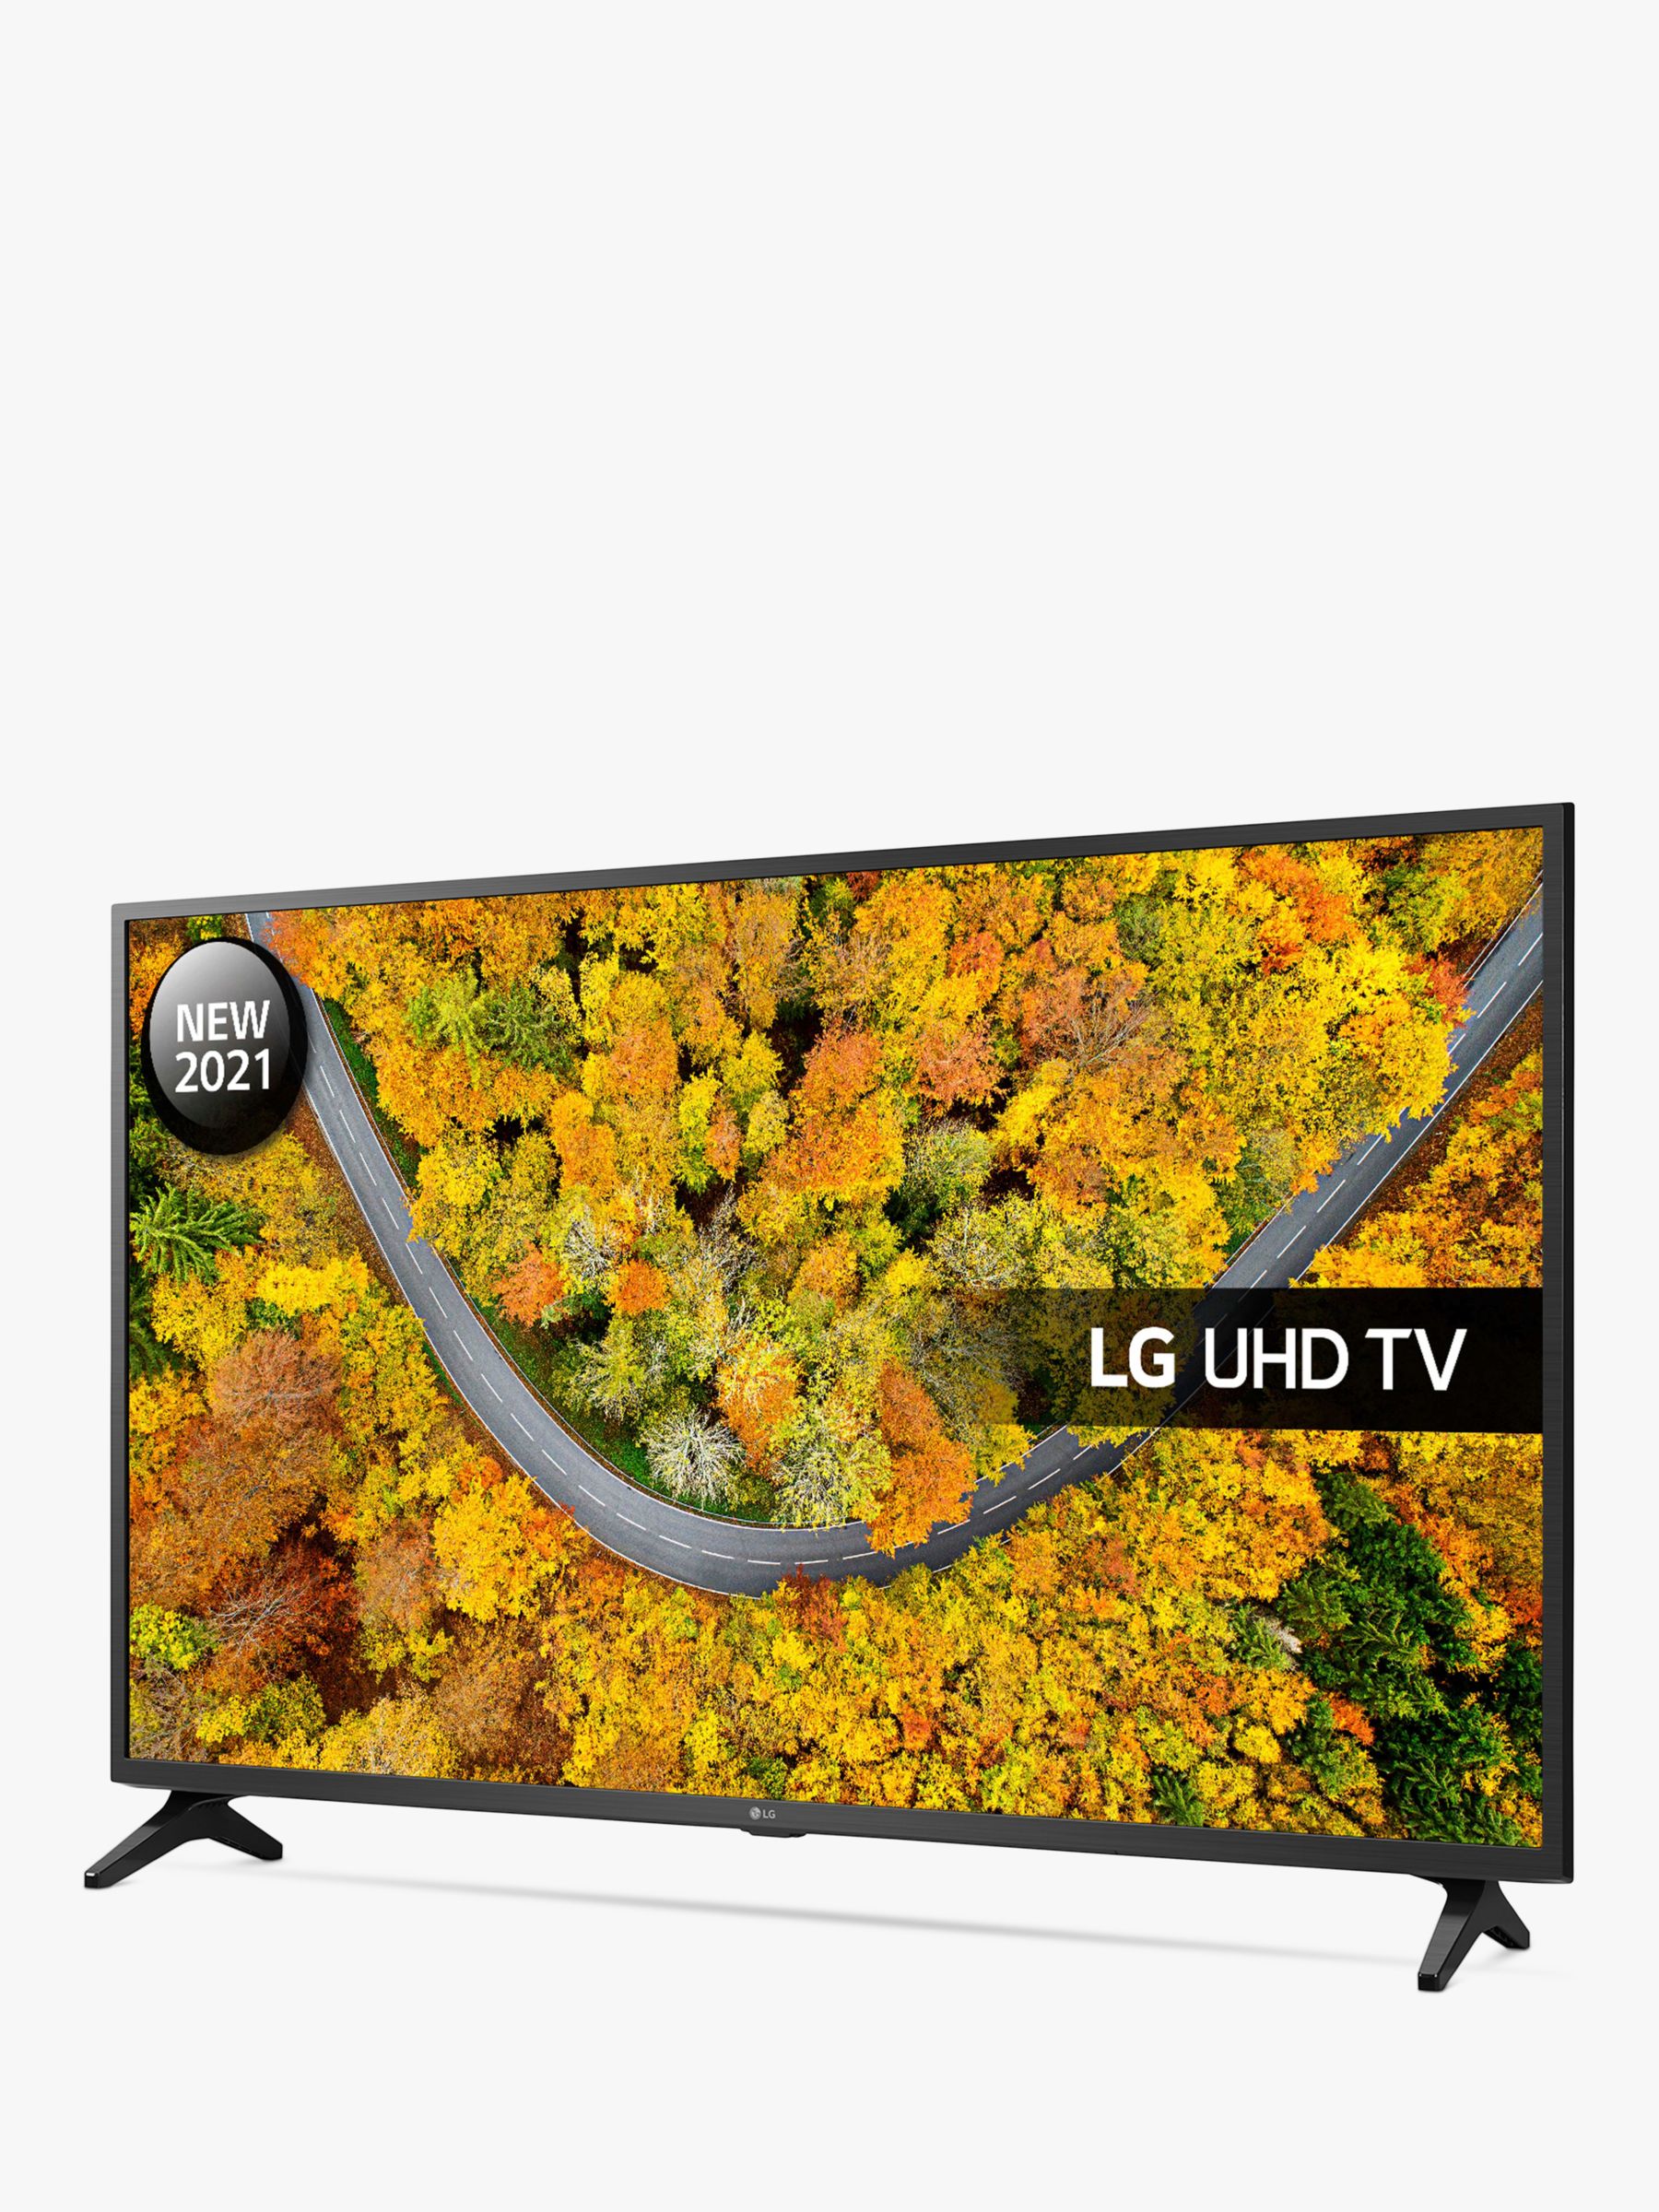 LG LED HDR 4K Ultra HD Smart TV, 55 with Freeview